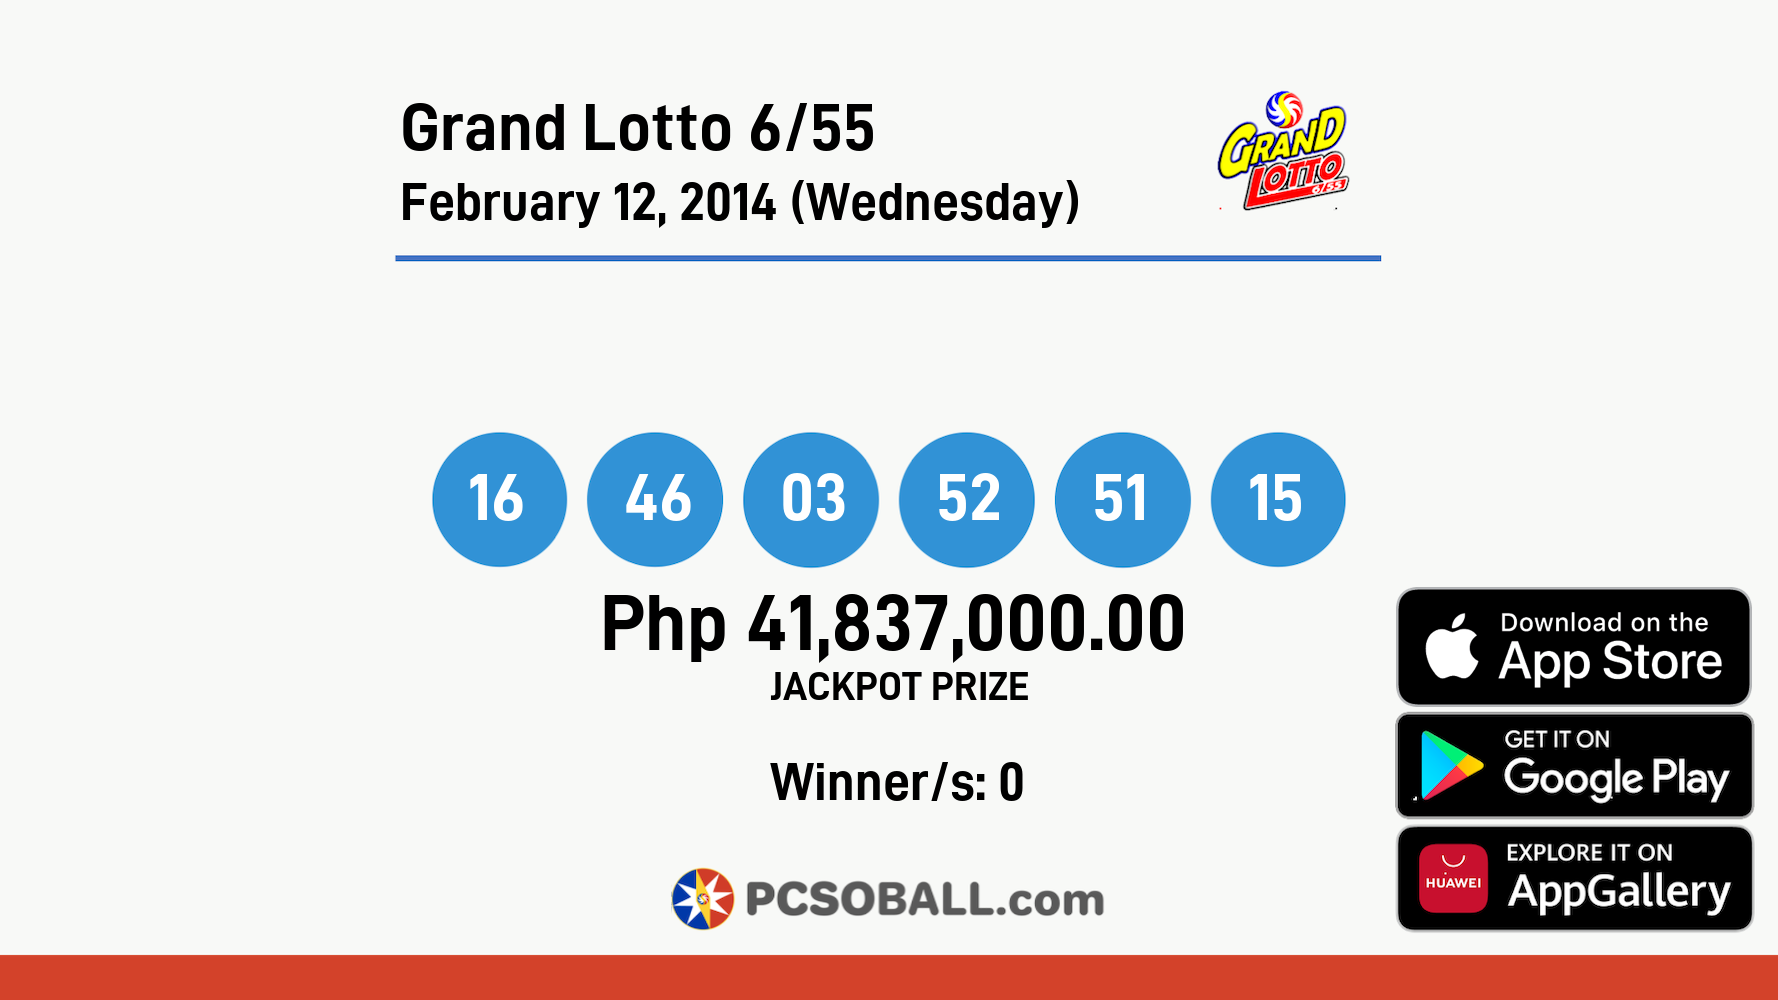 Grand Lotto 6/55 February 12, 2014 (Wednesday) Result